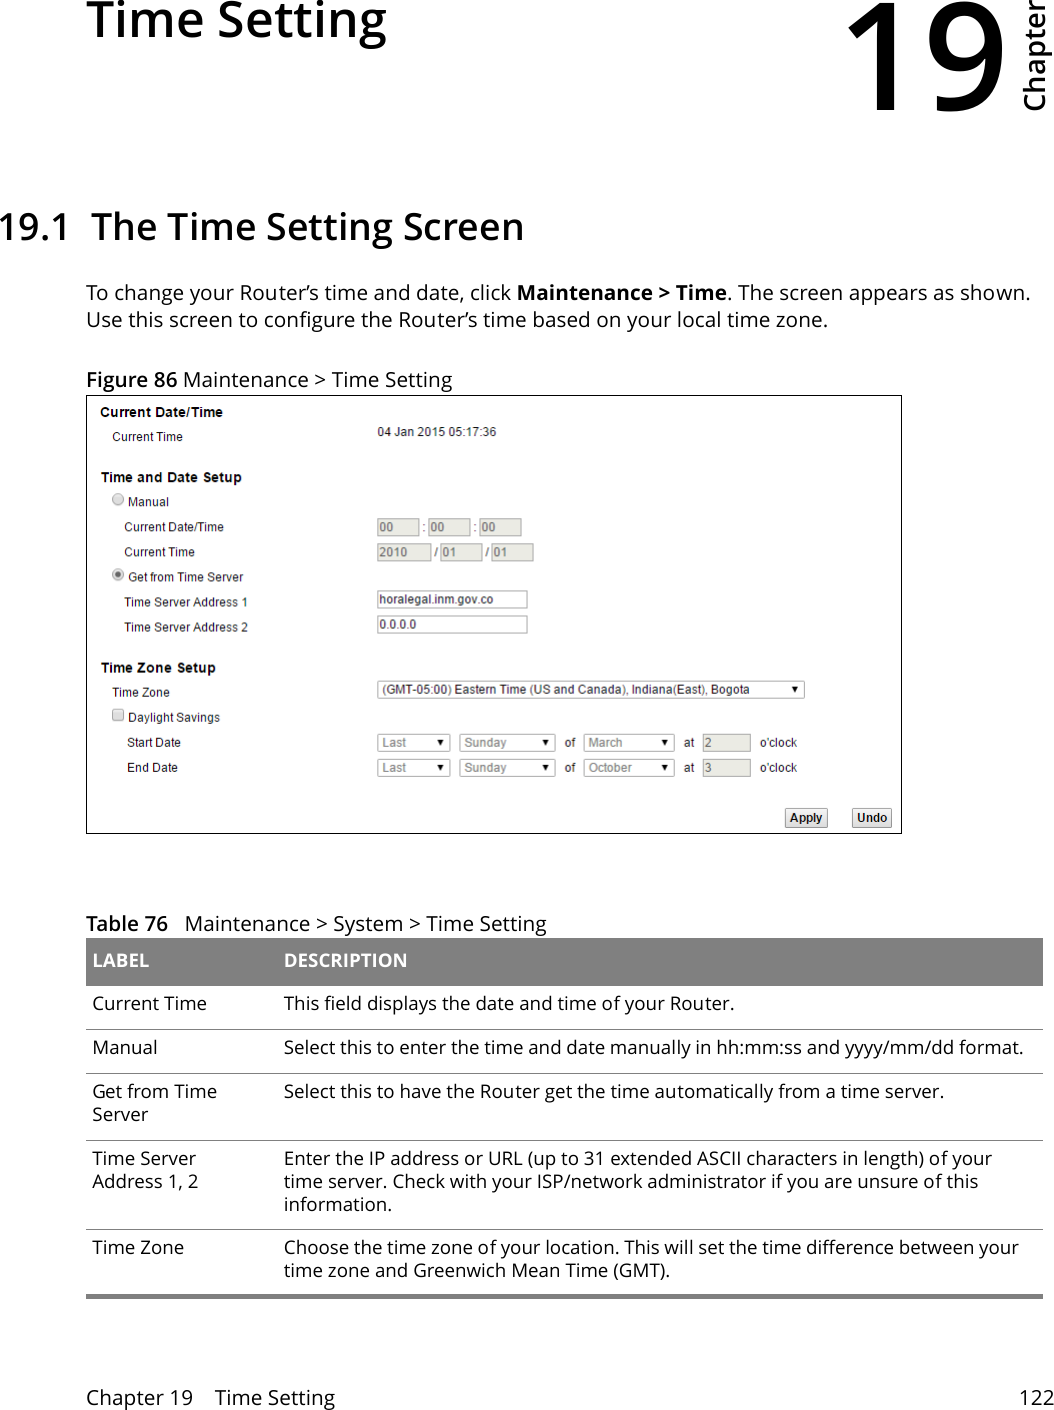 19Chapter Chapter 19    Time Setting 122CHAPTER 19 Chapter 19 Time Setting19.1  The Time Setting Screen To change your Router’s time and date, click Maintenance &gt; Time. The screen appears as shown. Use this screen to configure the Router’s time based on your local time zone. Figure 86 Maintenance &gt; Time Setting  Table 76   Maintenance &gt; System &gt; Time Setting LABEL DESCRIPTIONCurrent Time  This field displays the date and time of your Router.Manual Select this to enter the time and date manually in hh:mm:ss and yyyy/mm/dd format.Get from Time ServerSelect this to have the Router get the time automatically from a time server.Time Server Address 1, 2Enter the IP address or URL (up to 31 extended ASCII characters in length) of your time server. Check with your ISP/network administrator if you are unsure of this information.Time Zone Choose the time zone of your location. This will set the time difference between your time zone and Greenwich Mean Time (GMT). 